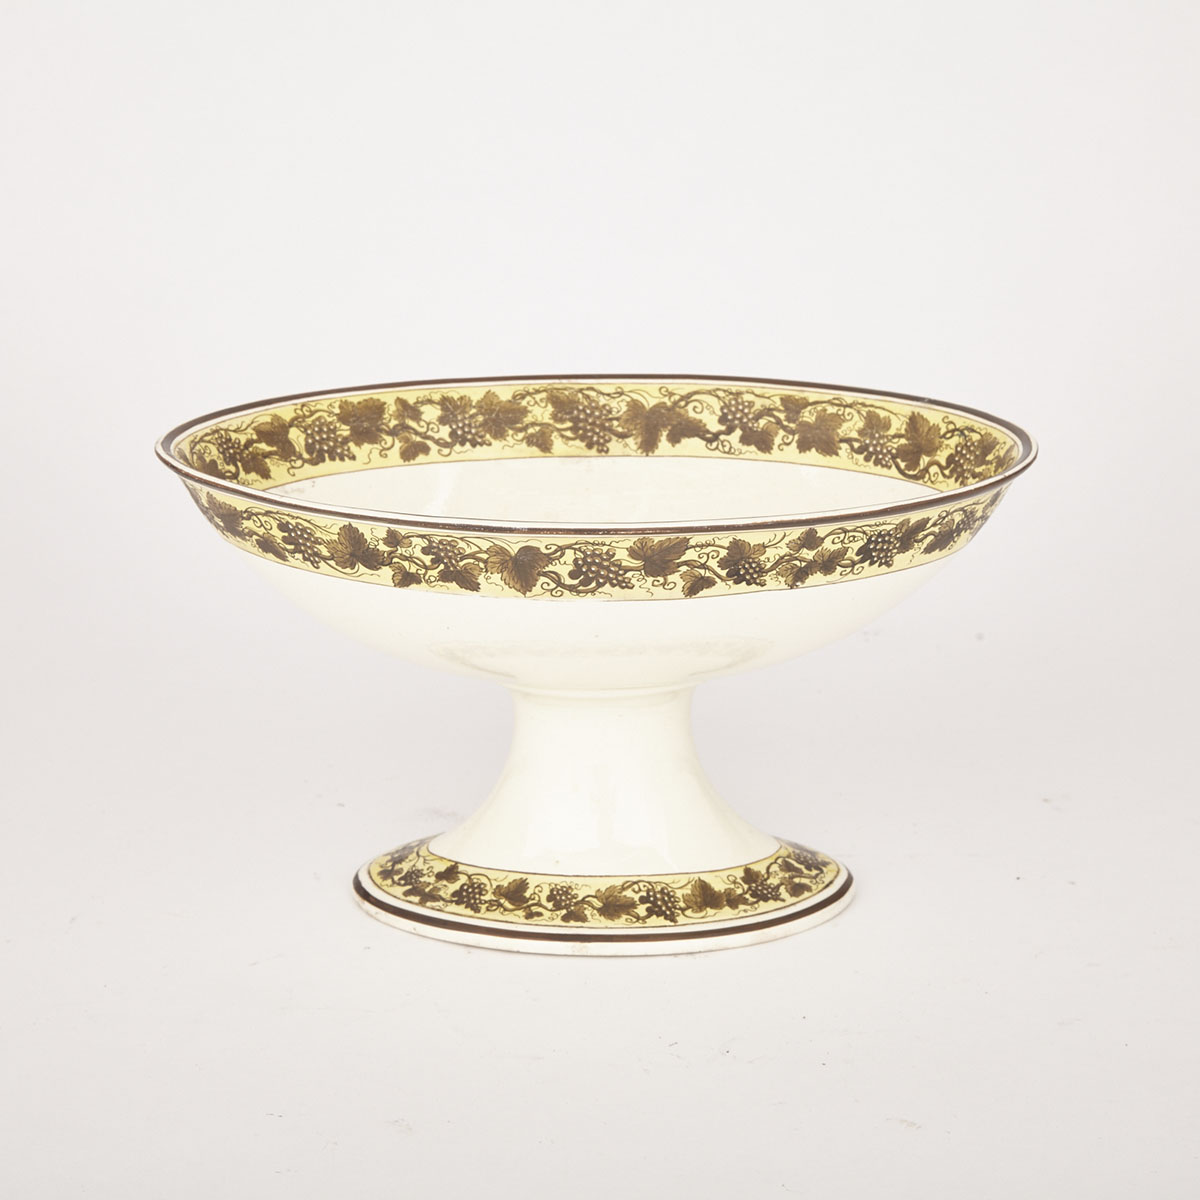 Wedgwood Creamware Footed Comport, 19th century